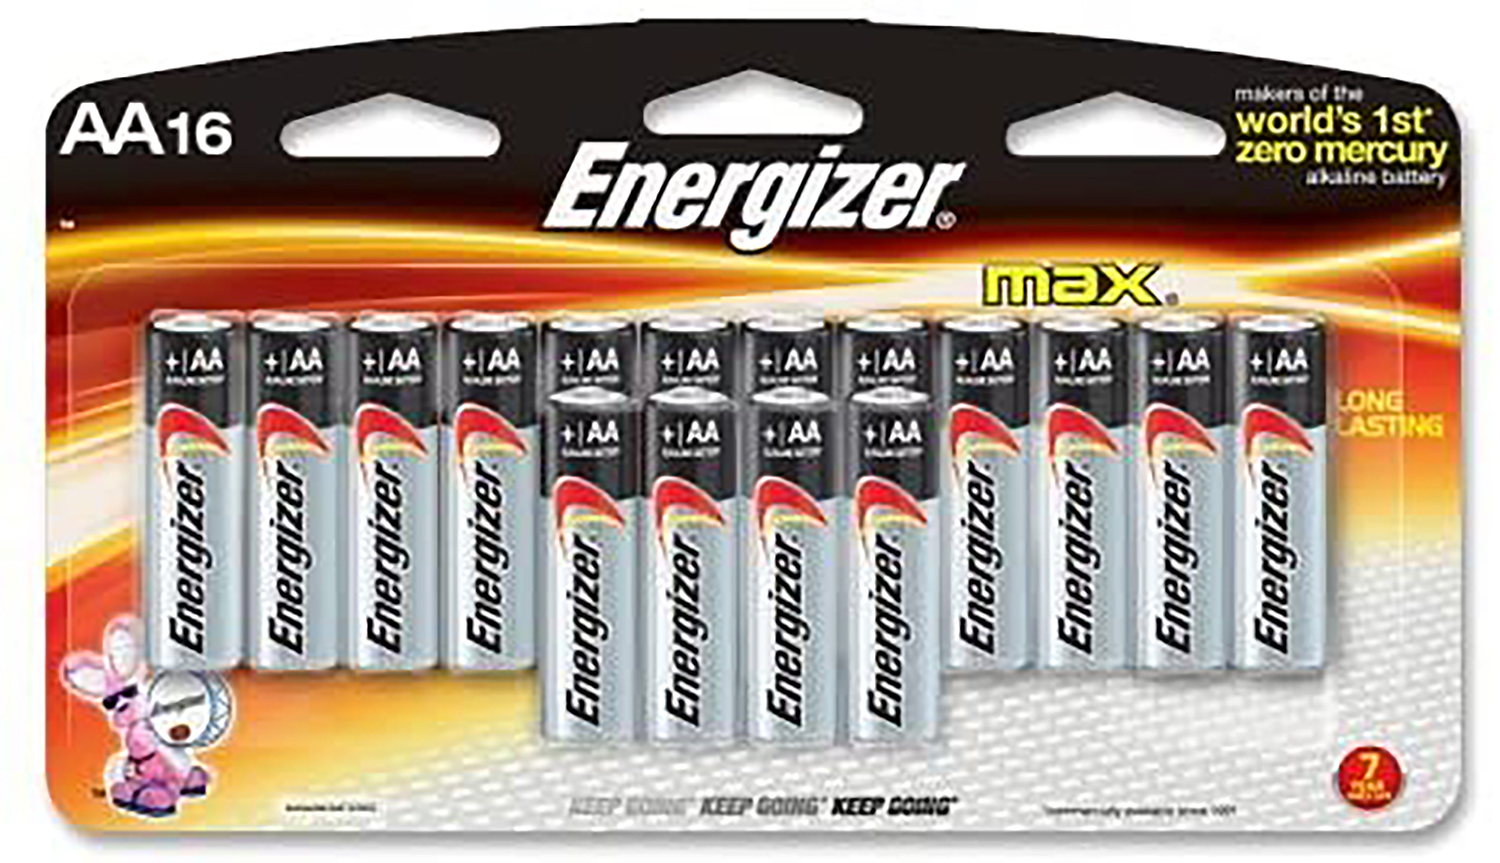 ENERGIZER MAX BATTERRIES AA 16-PACK